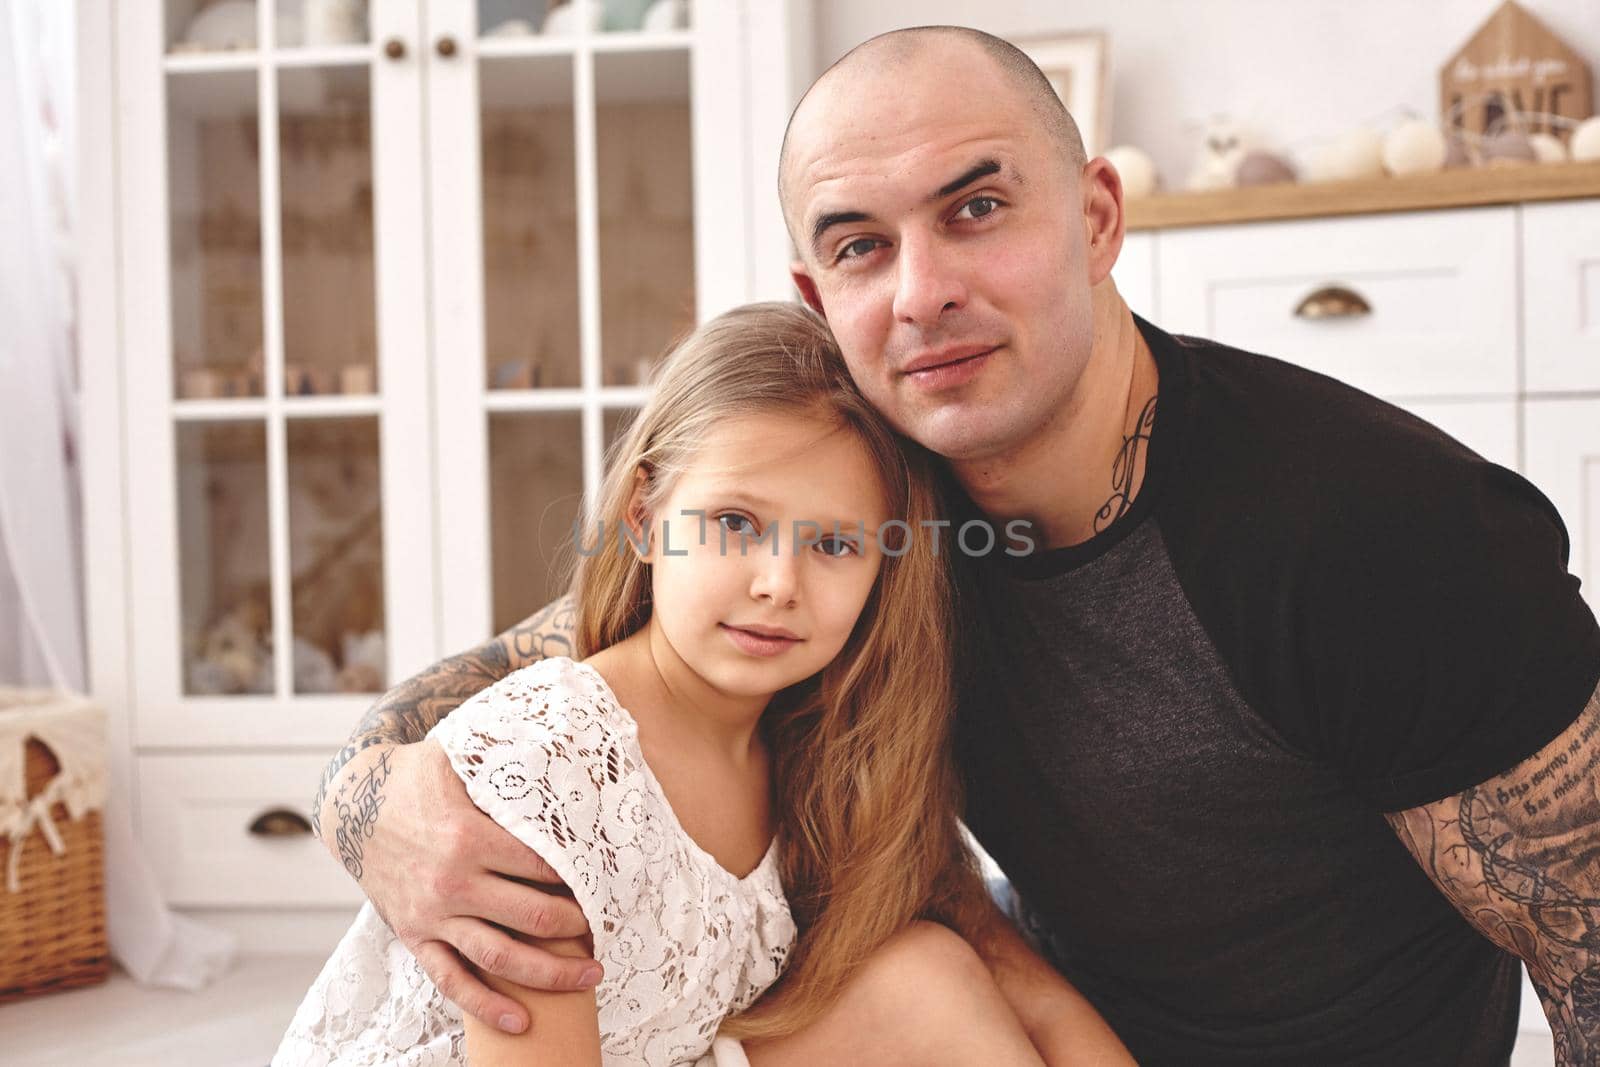 White modern kid's room whith a wooden furniture. Adorable daughter whith a long blond hair wearing a white dress . Young daddy with tattoos is hugging her and they are looking at the camera. Friendly family spending their free time together sitting on a pillows.